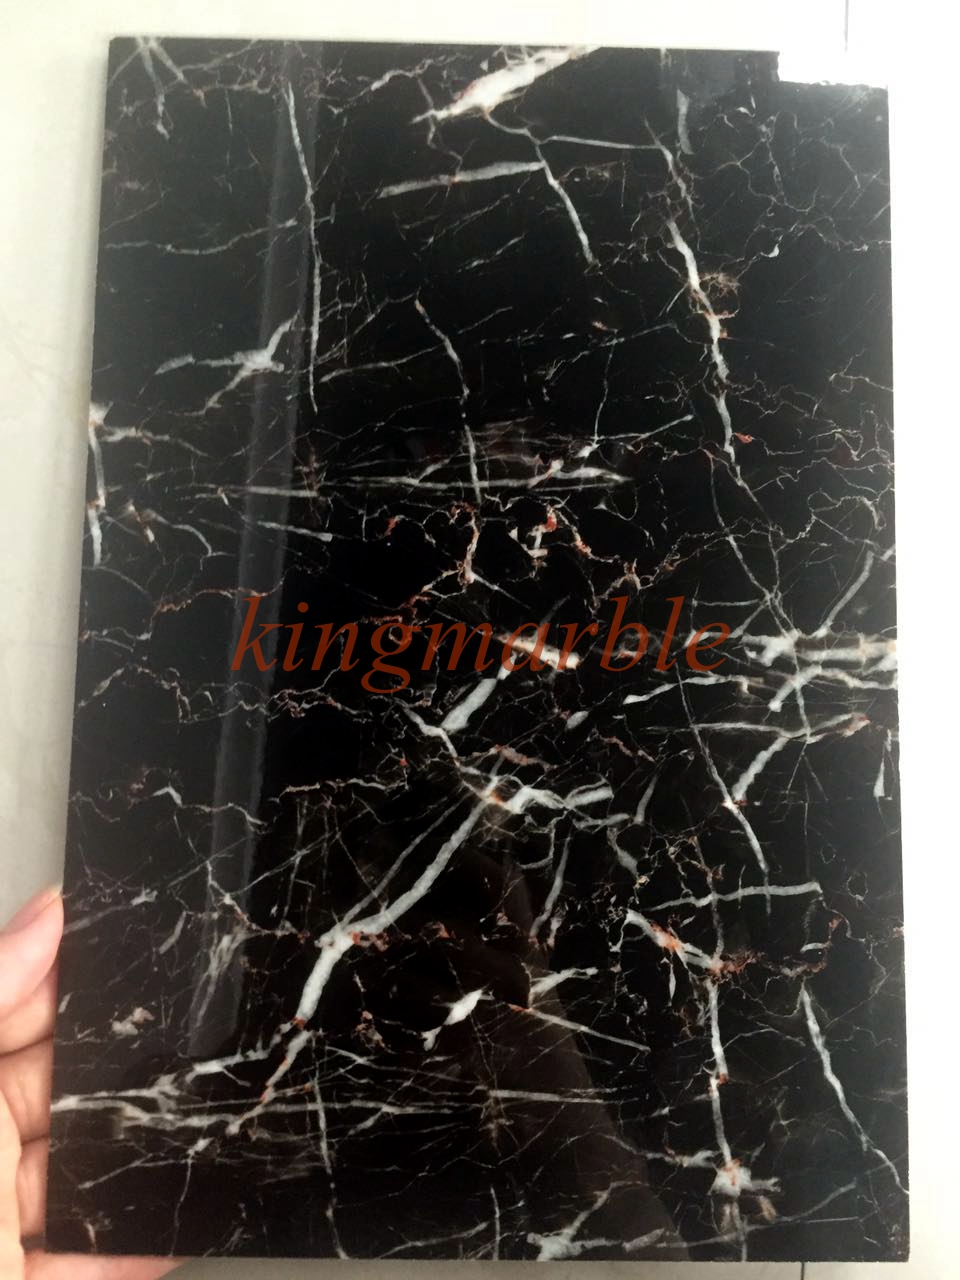 The new decoration materials pvc marble uv sheet